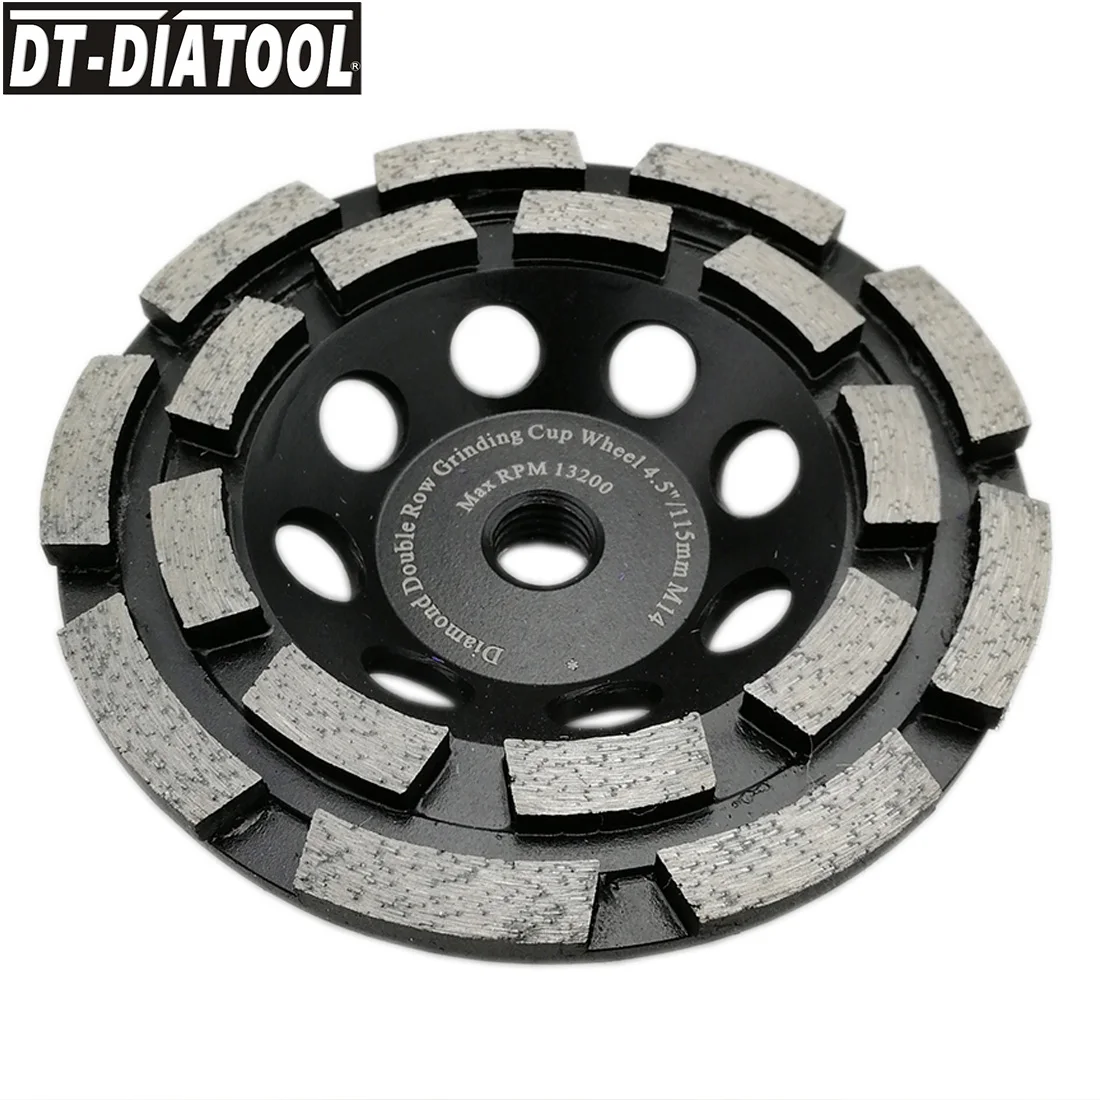 

DT-DIATOOL 1pc Diamond Double Row Cup Grinding Wheel with M14 thread Grinding for Concrete hard stone granite Dia 115mm/4.5inch